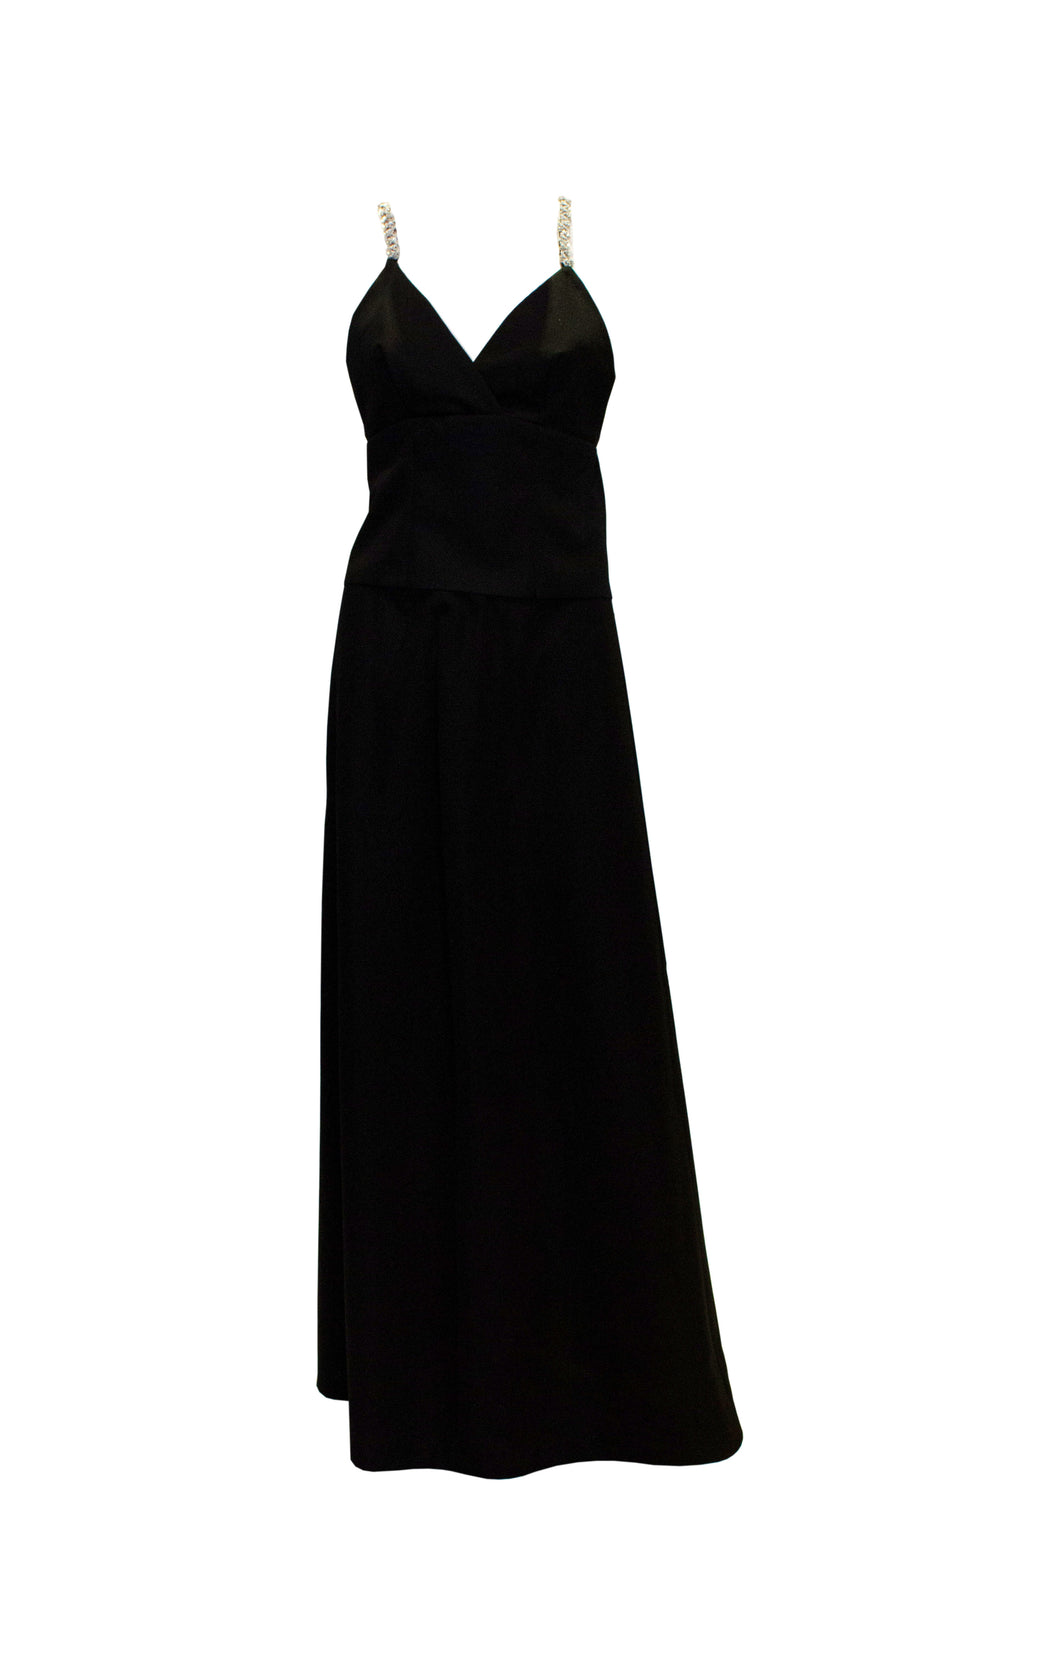 A vintage 1970s black Chic Evening Skirt and Top